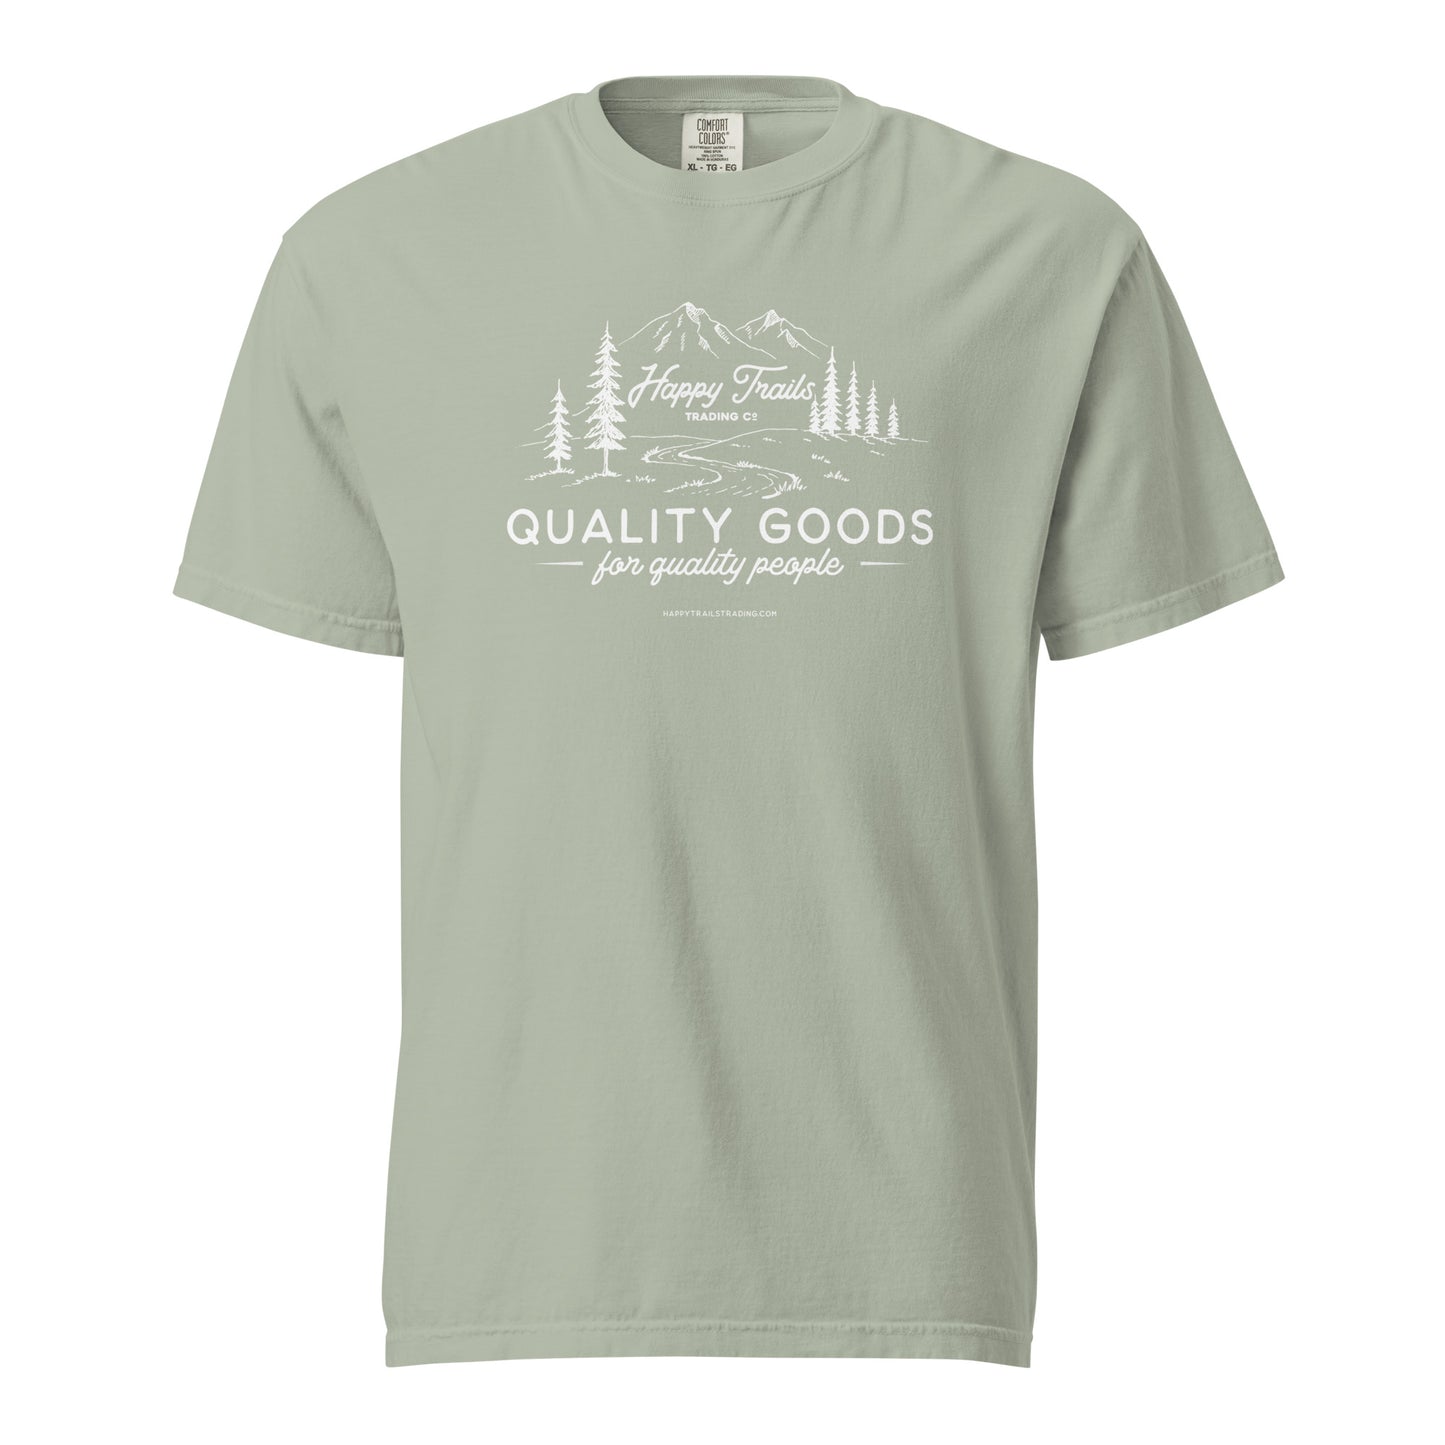 Quality Goods For Quality People - Unisex T-Shirt